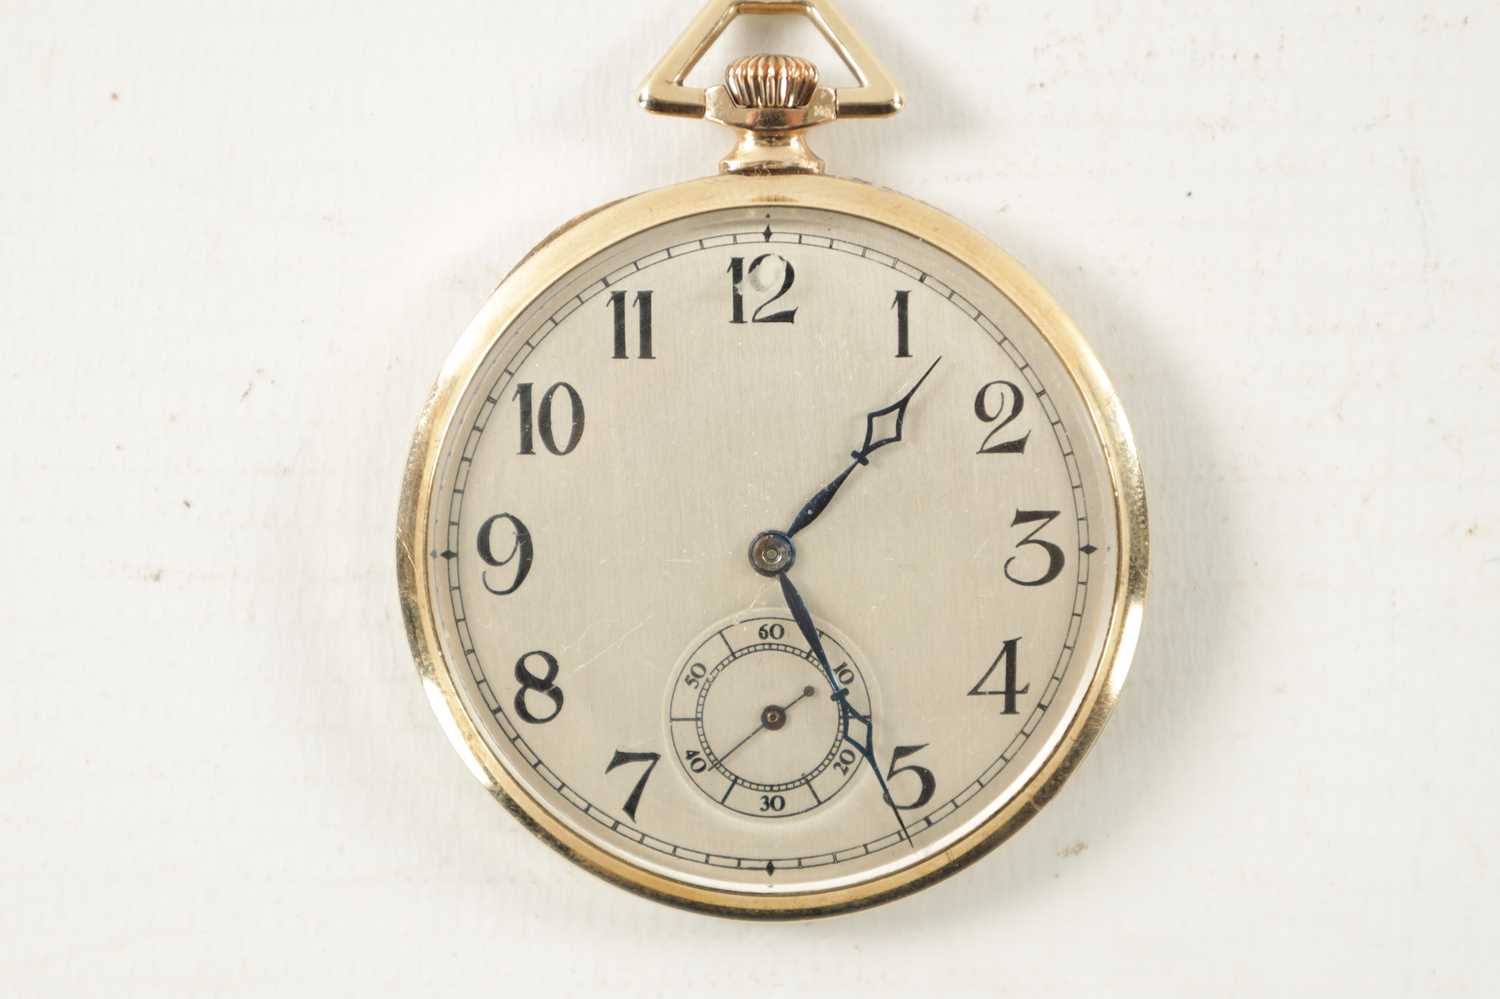 A 1920’S 9CT GOLD VERTEX WATCH CO. OPEN FACED POCKET WATCH - Image 3 of 7